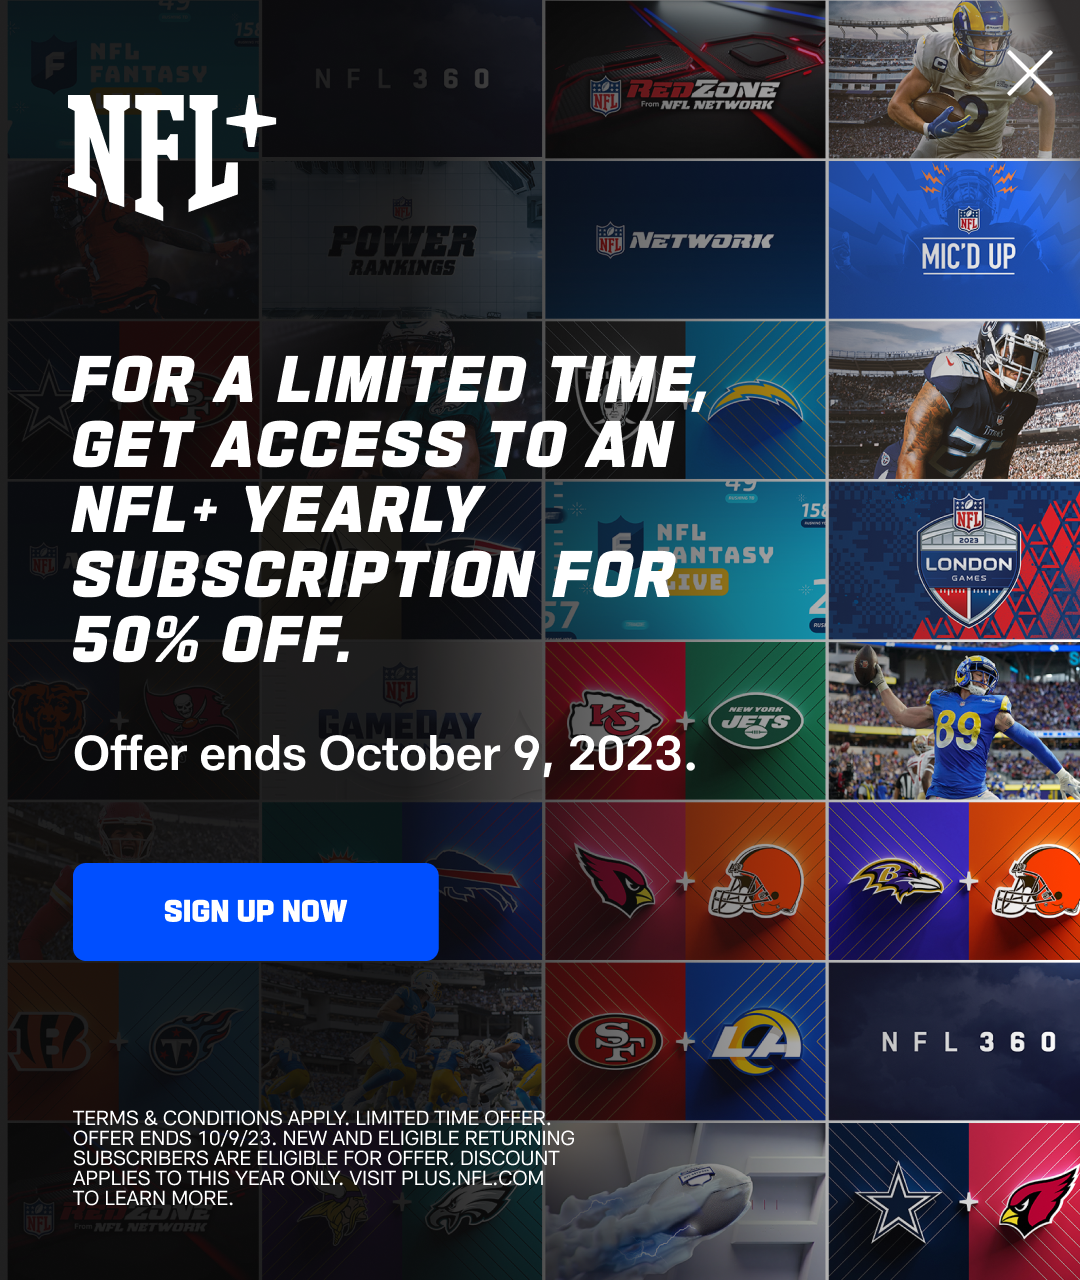 NFL Confirms NFL+ Streaming Media Service for Its App